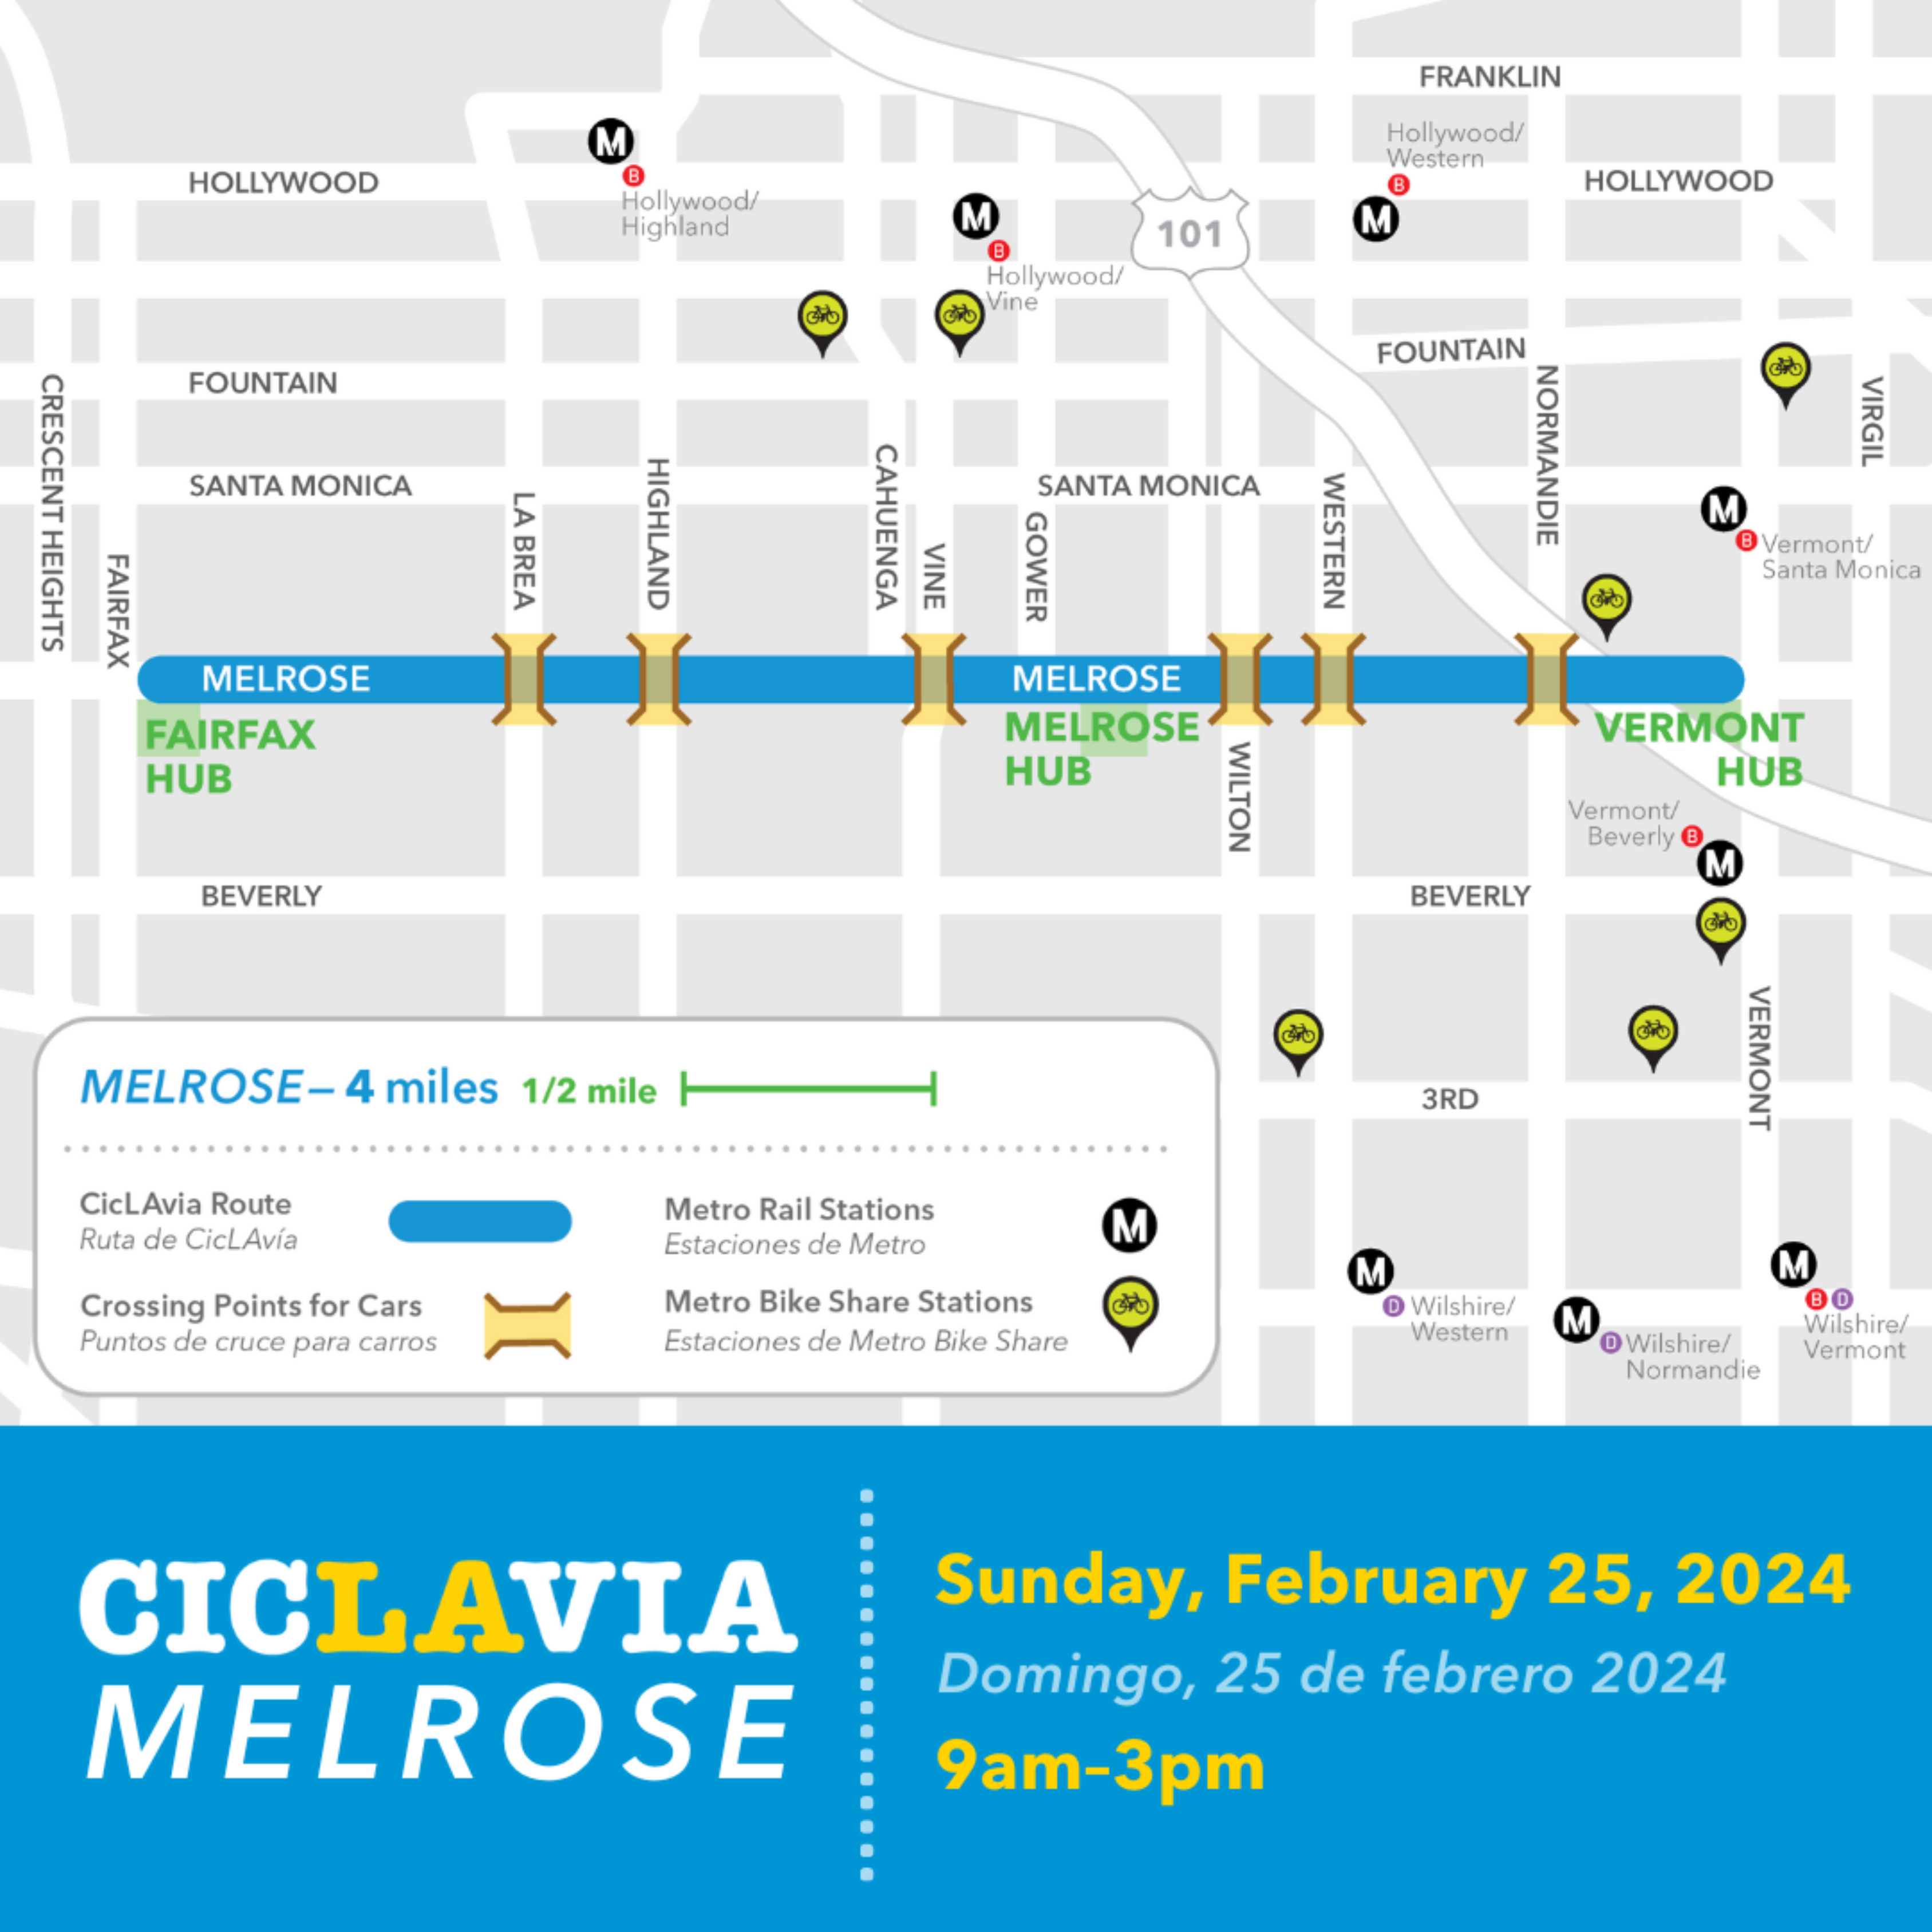 Gear up for CicLAvia Melrose